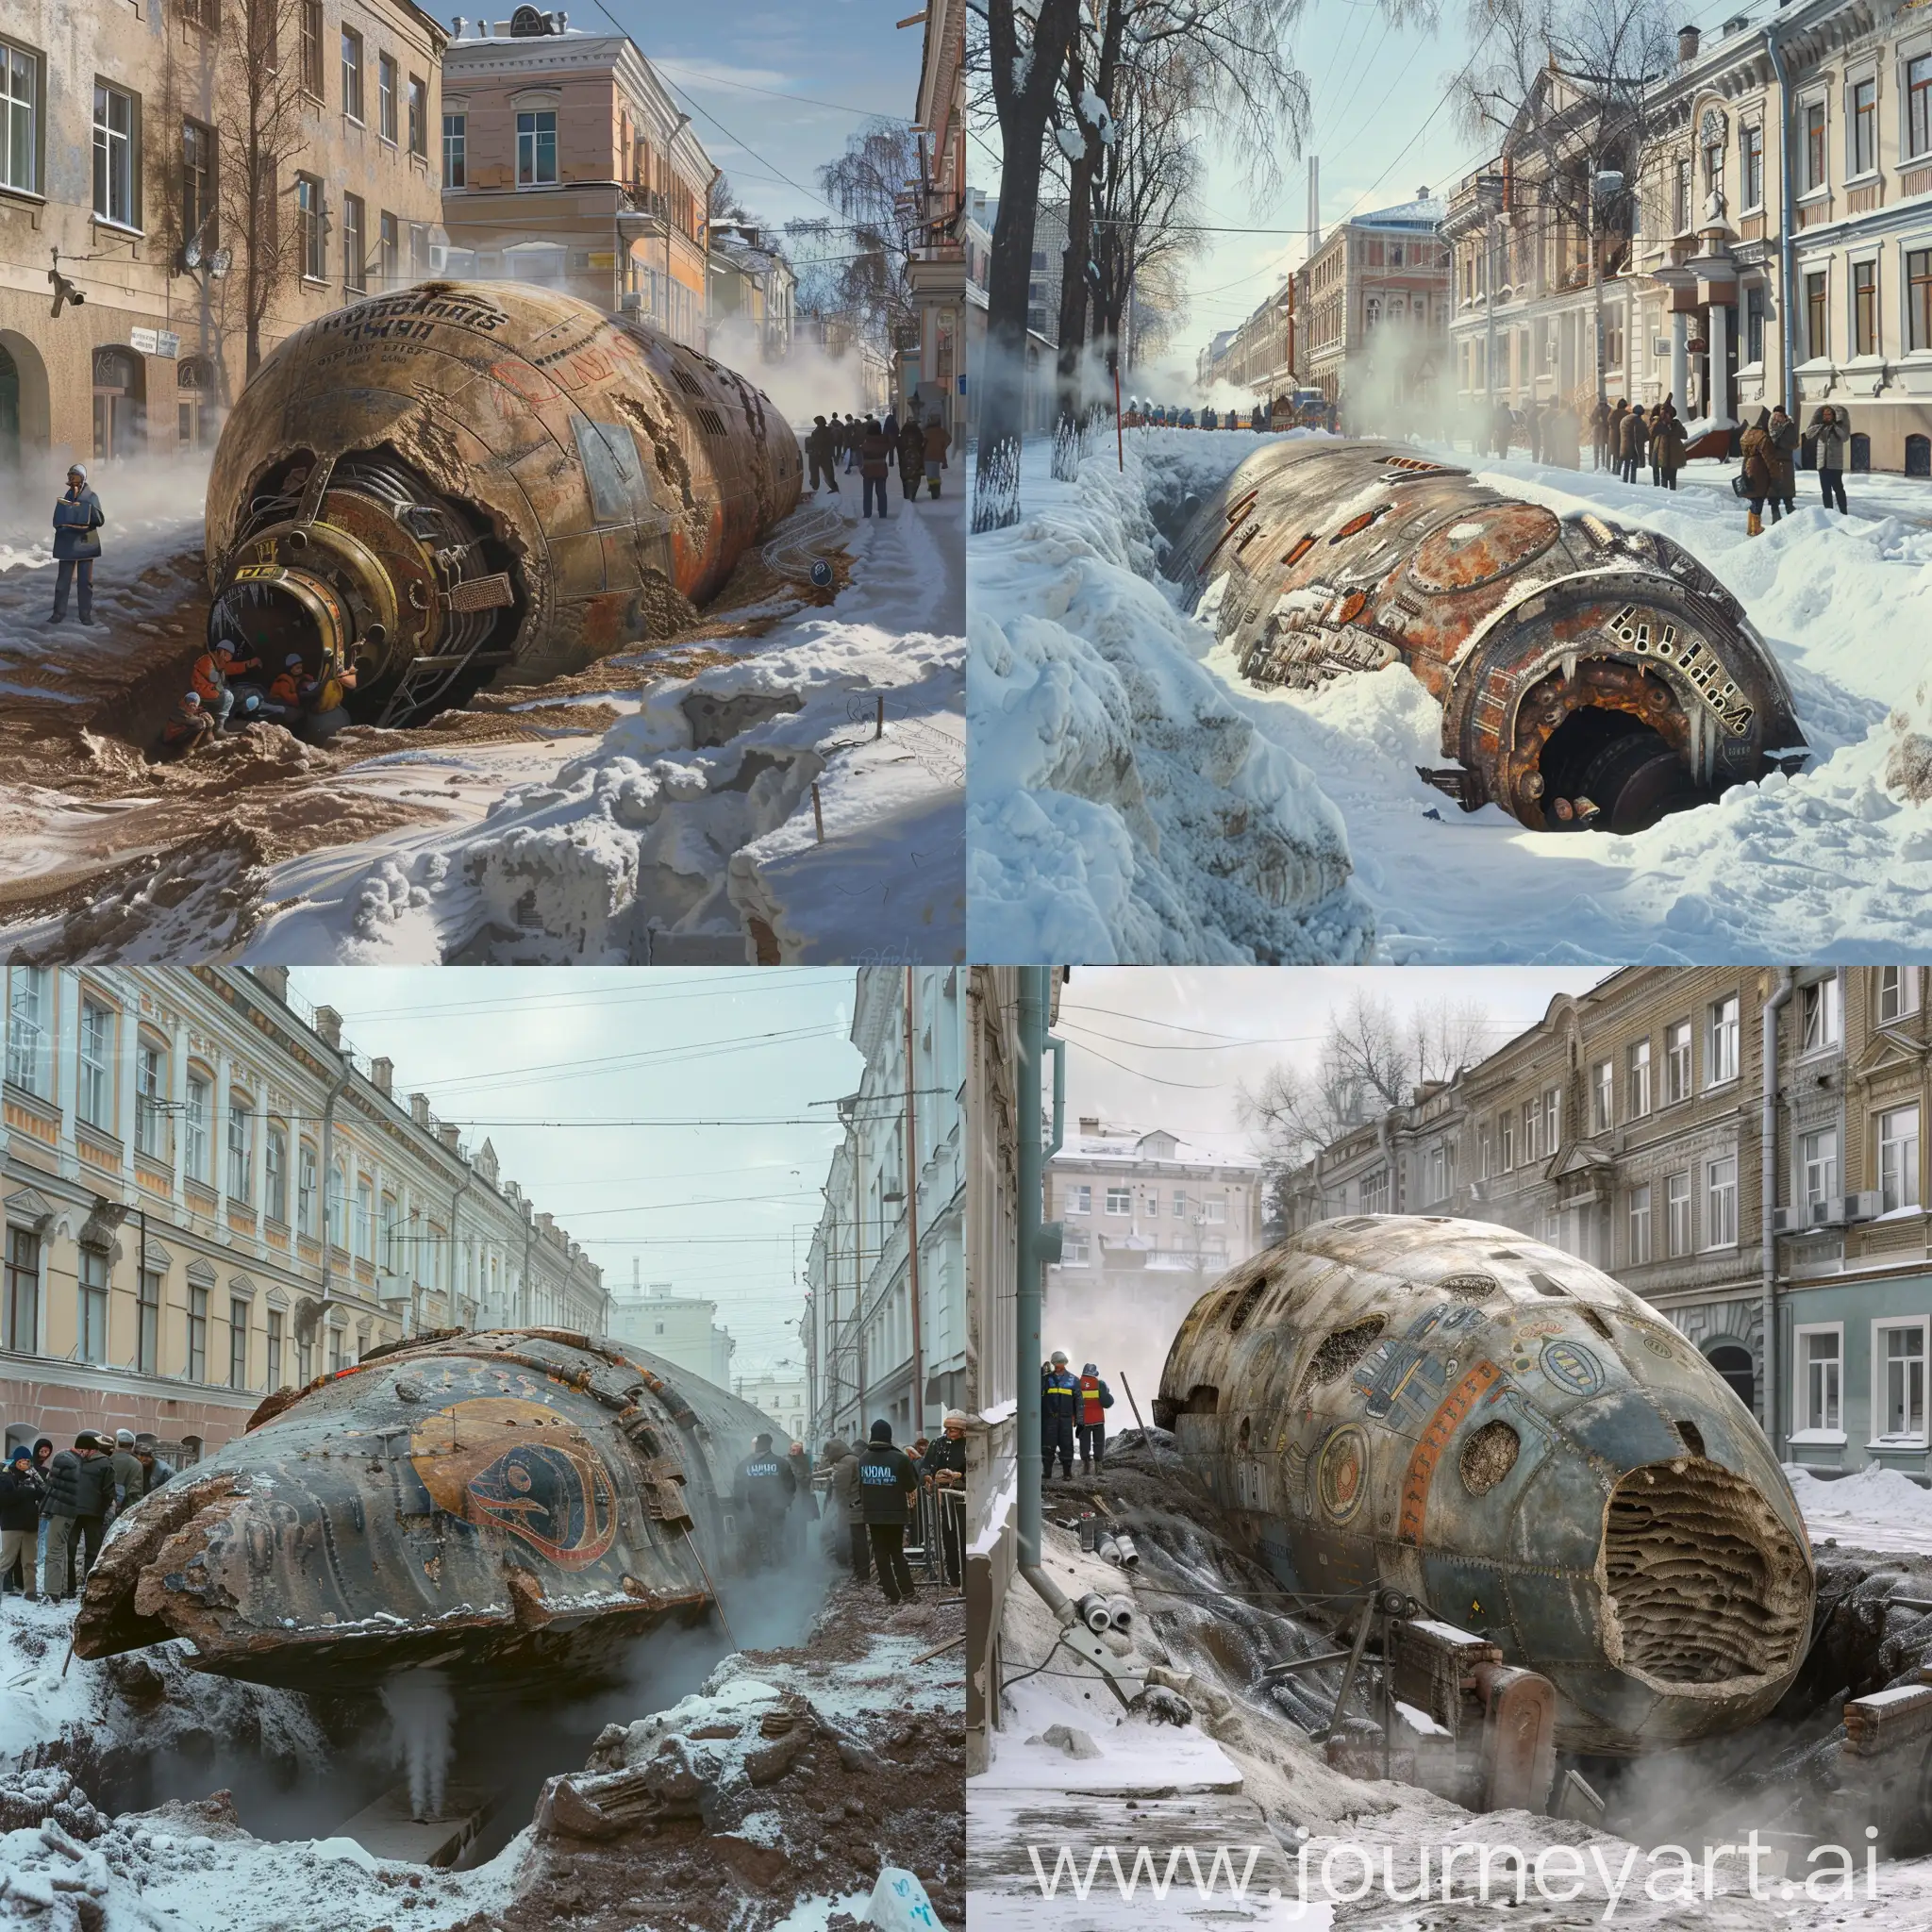 KhokhlomaPainted-Spaceship-Unearthed-in-St-Petersburg